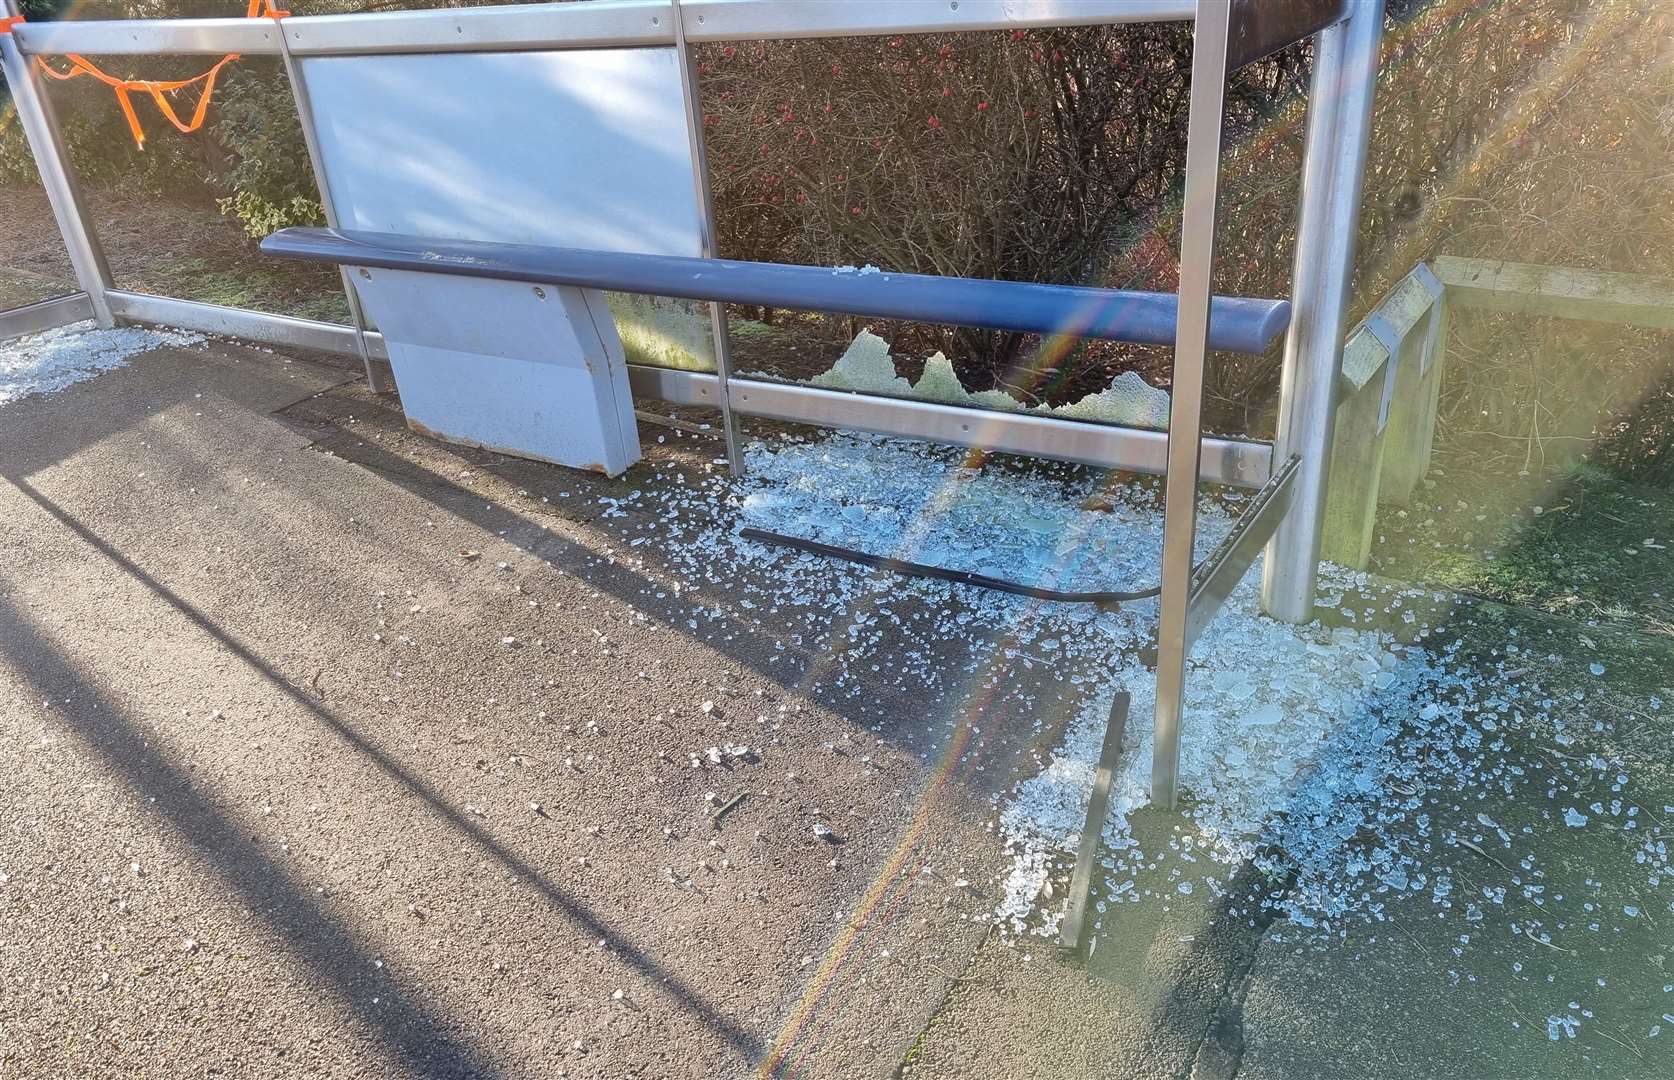 Shattered glass coats the pavement by the bus stop